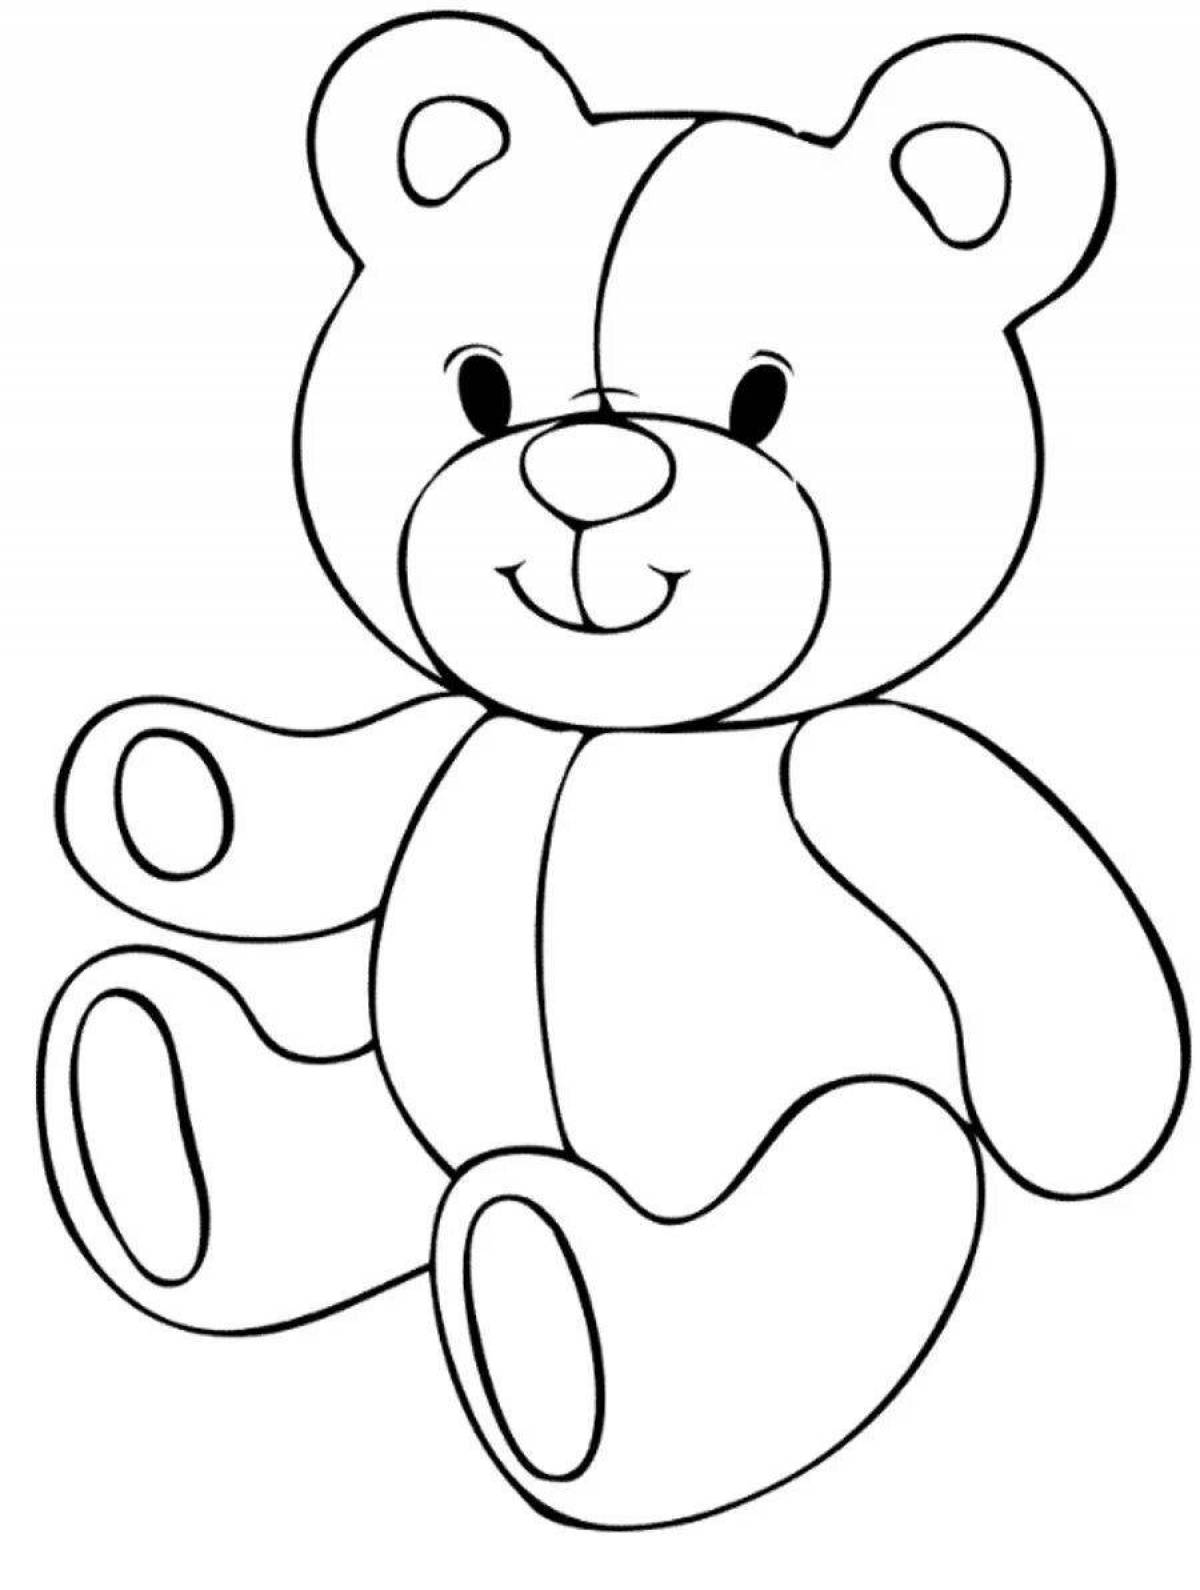 Bright coloring pdf for the little ones